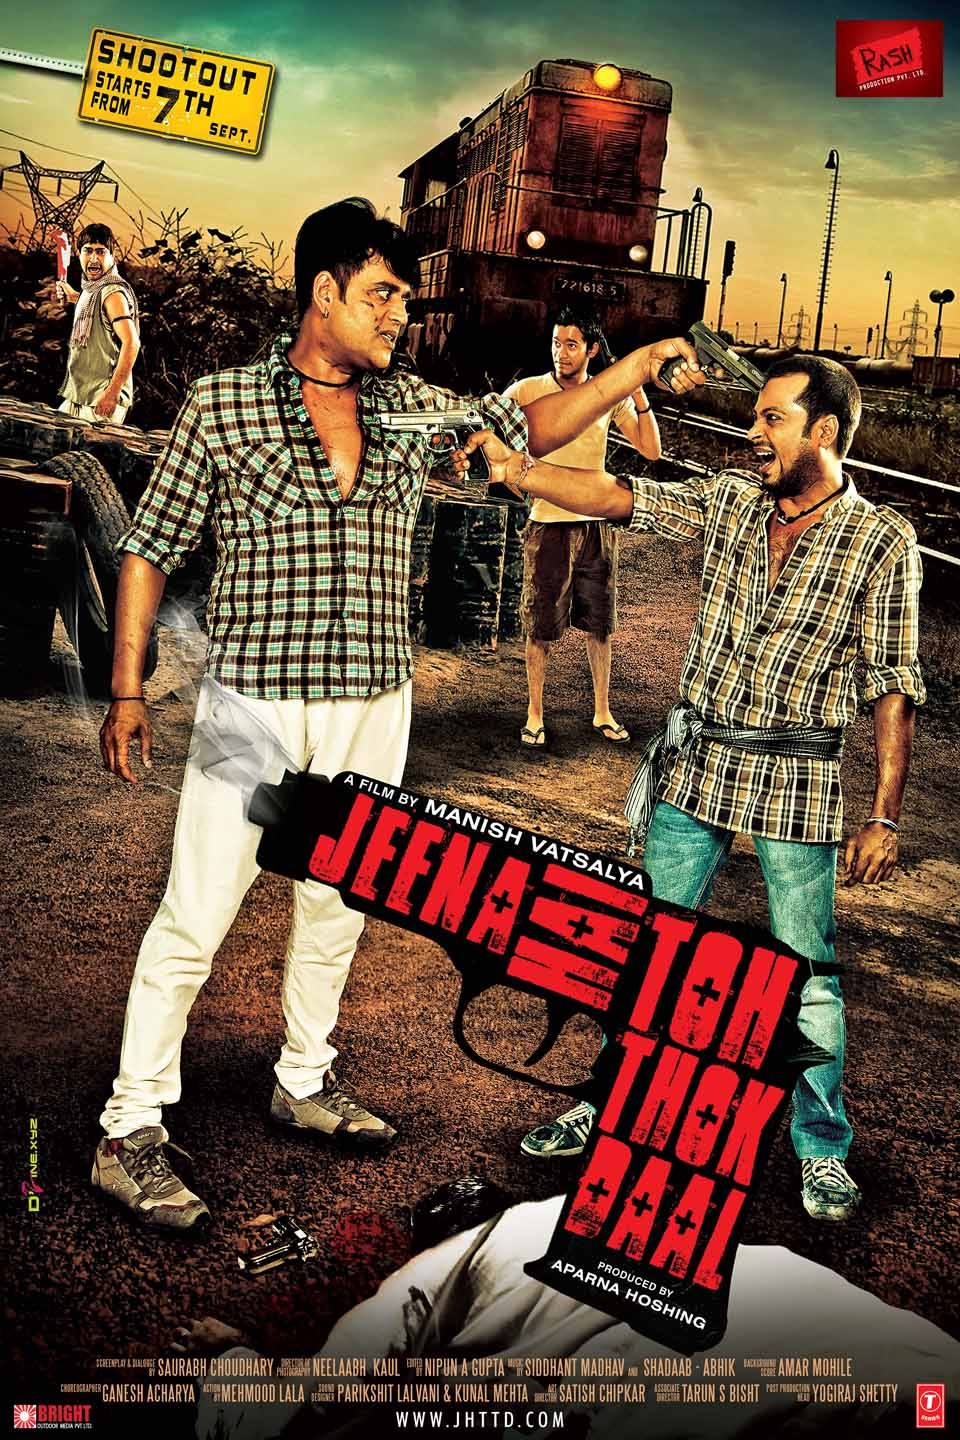 Extra Large Movie Poster Image for Jeena Hai Toh Thok Daal (#1 of 12)